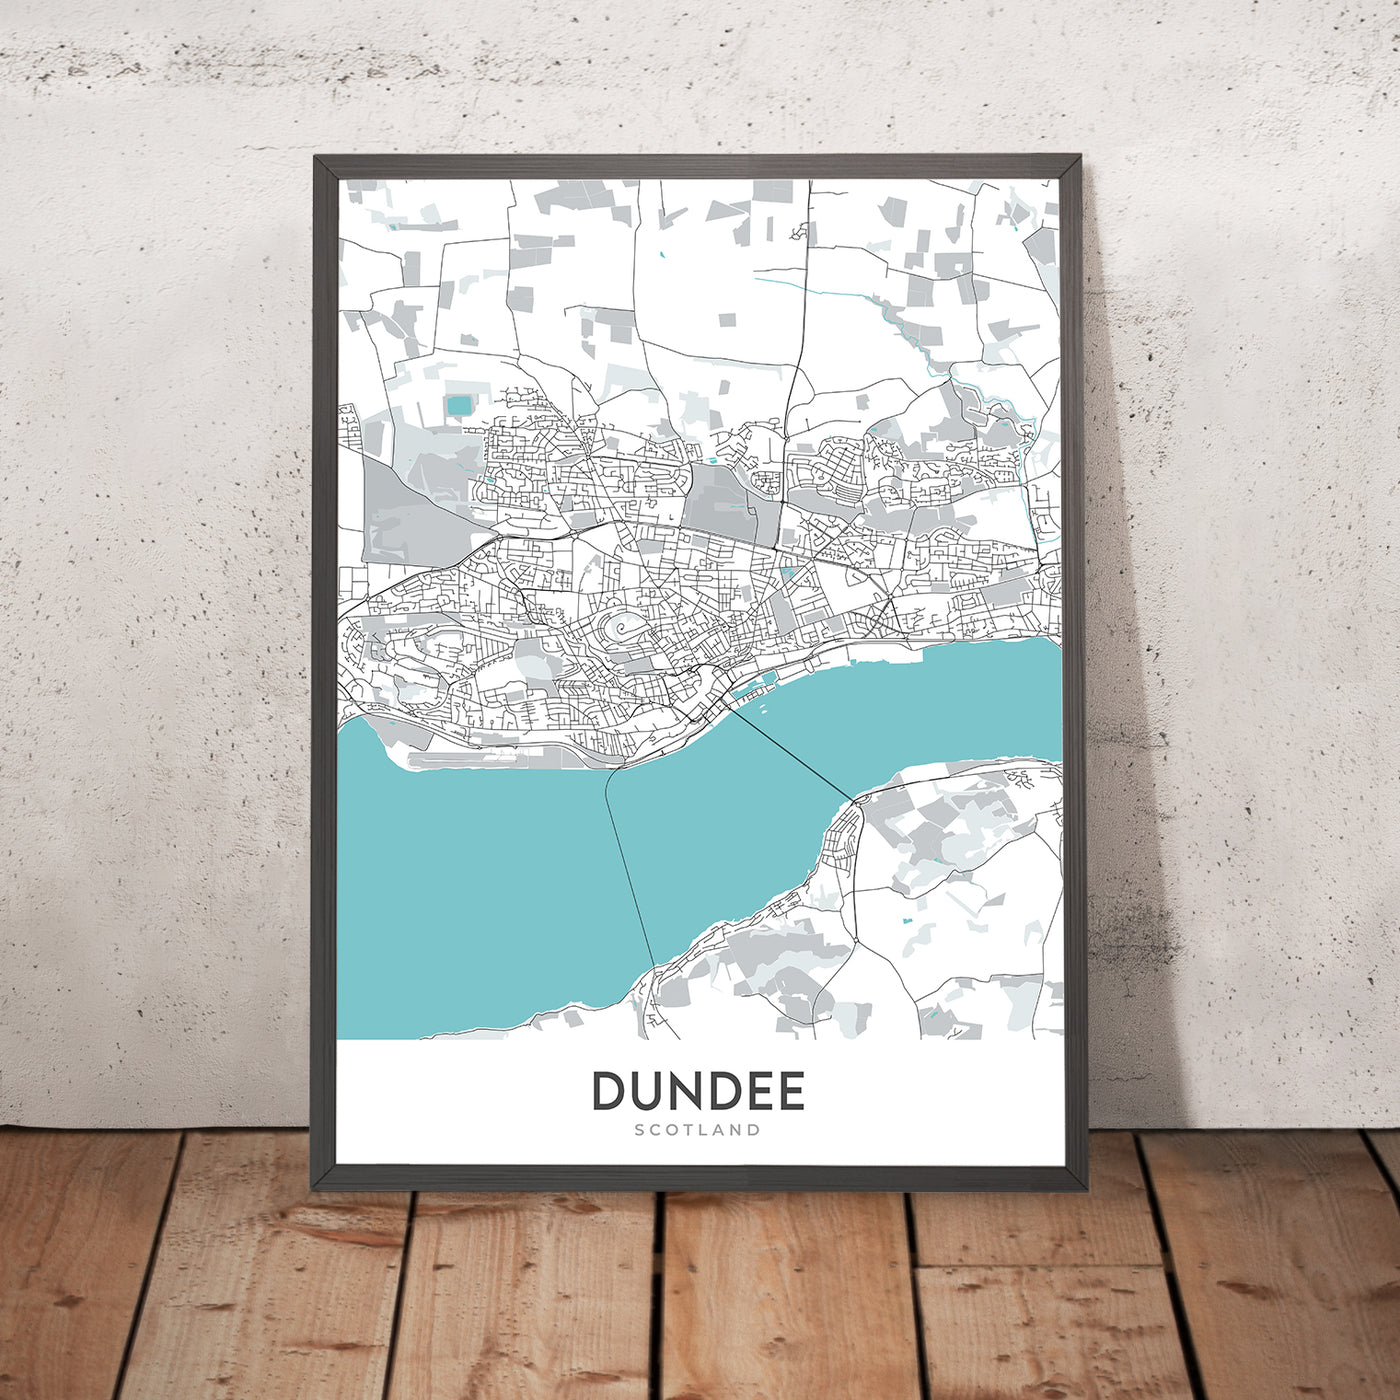 Modern City Map of Dundee, Scotland: City Centre, Tay Rail Bridge, Dundee Law, A90, V&A Dundee